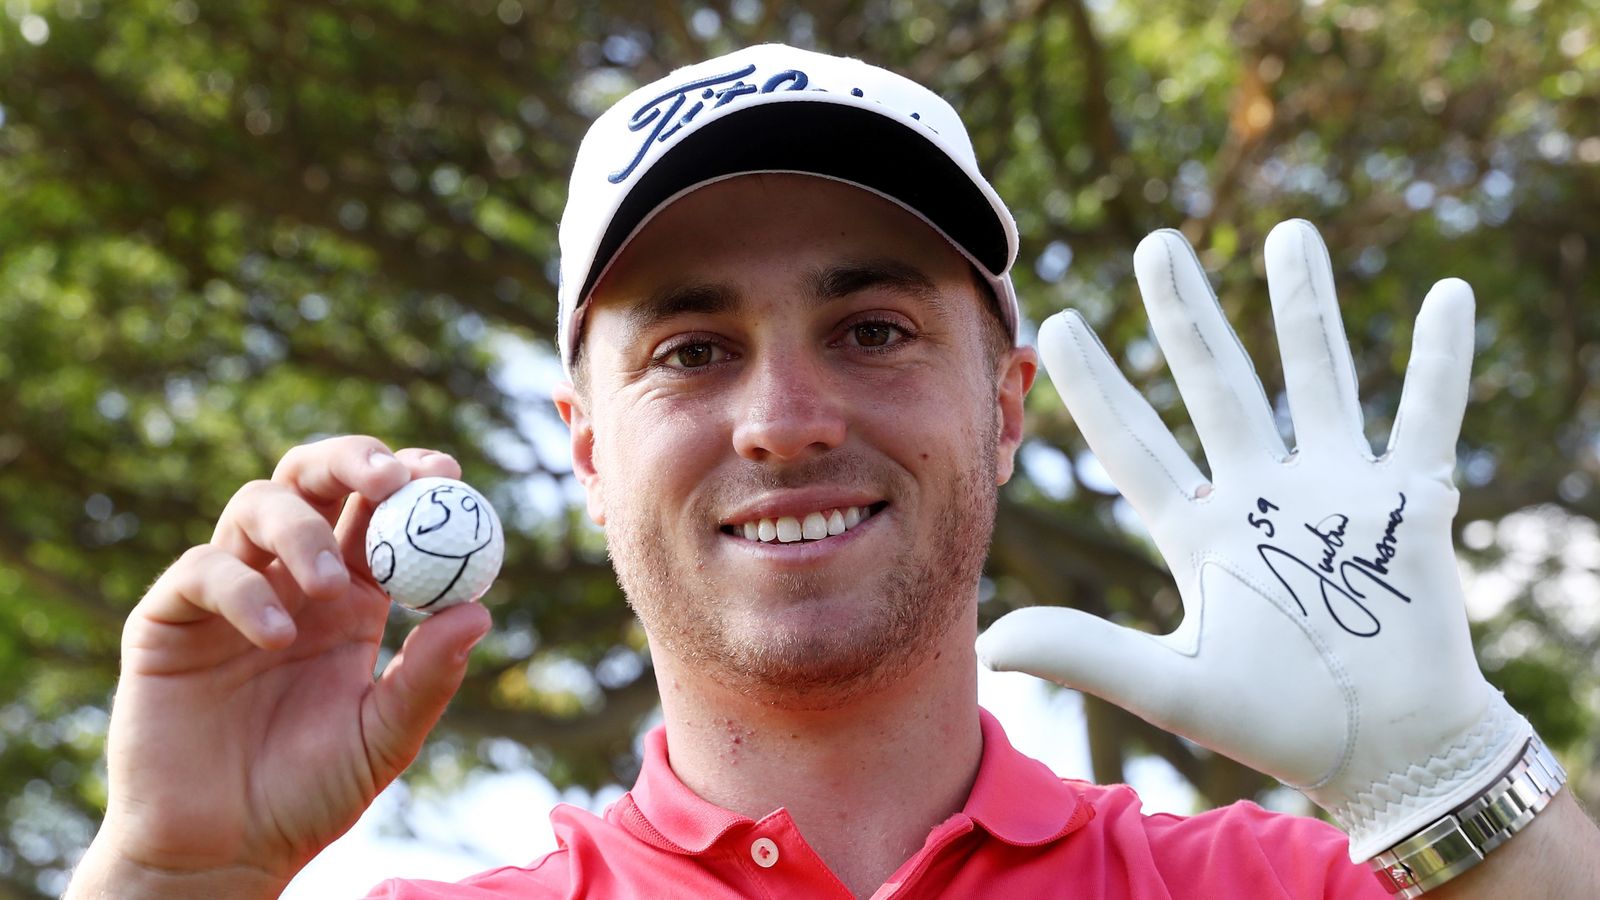 Relive the recordbreaking 59 from Justin Thomas at the Sony Open